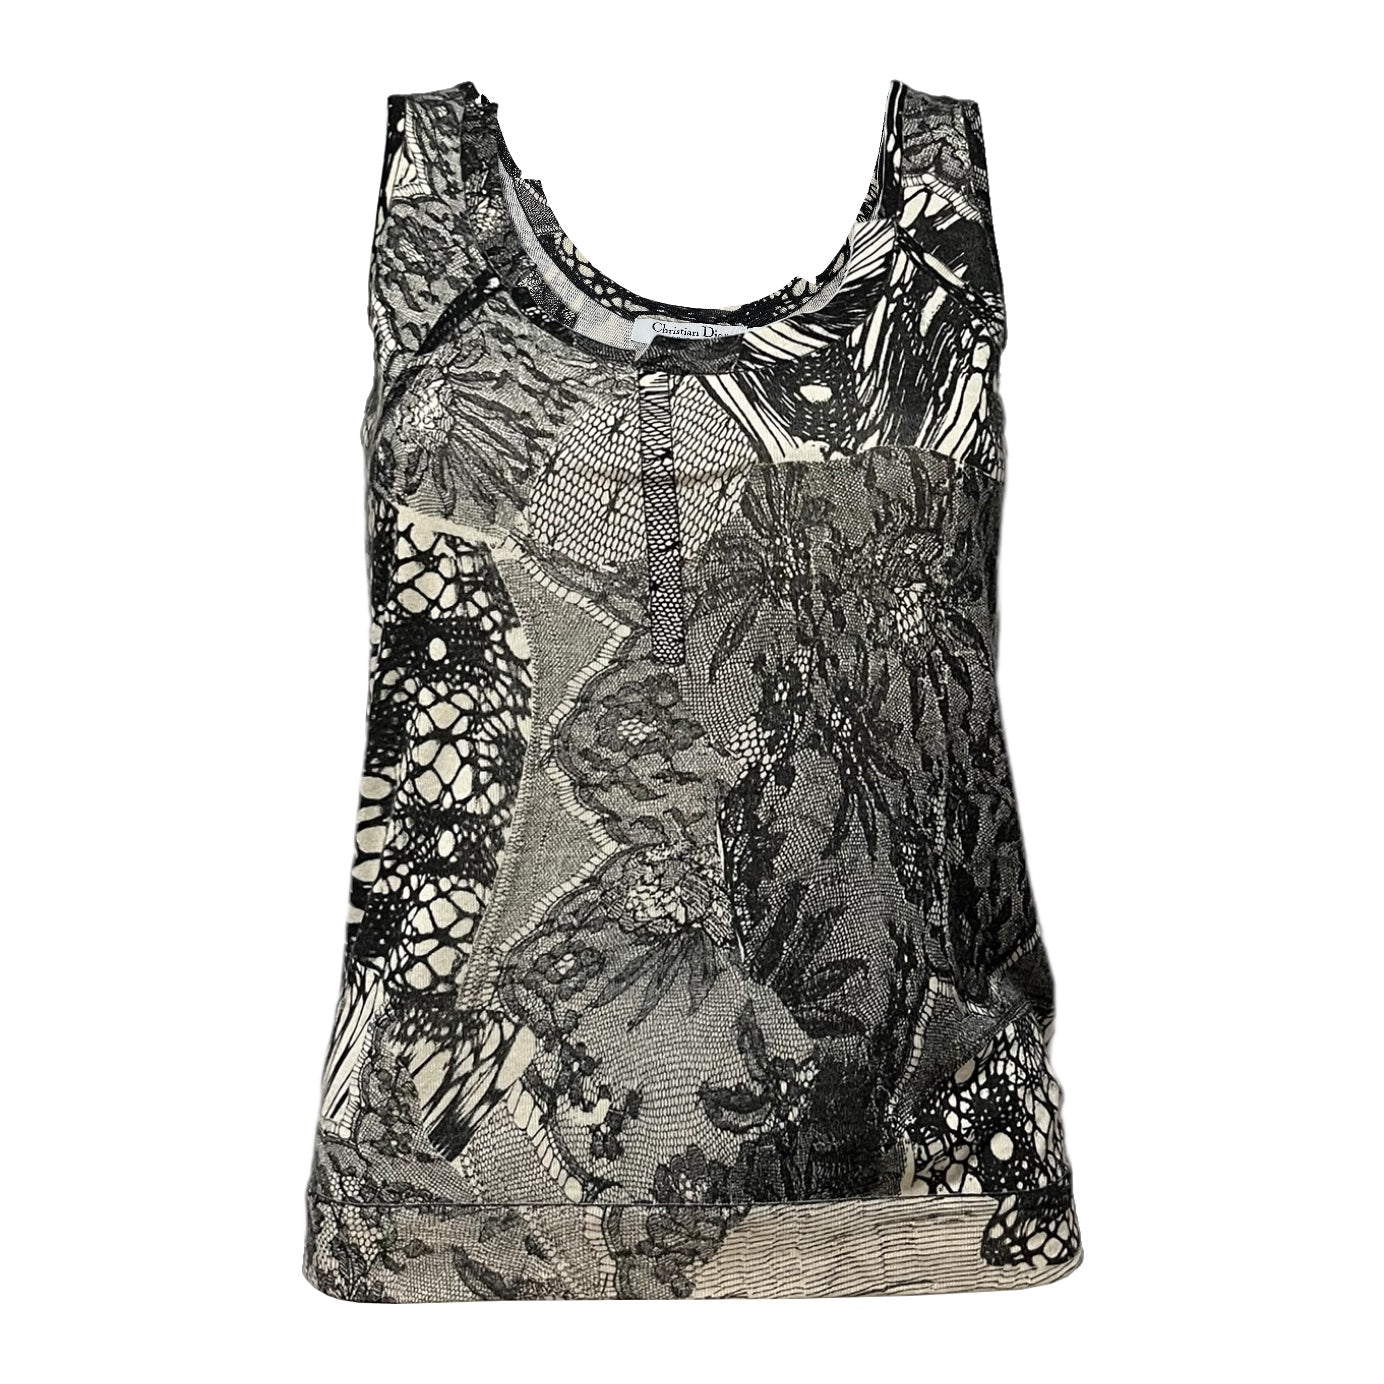 CHRISTIAN DIOR Spring Summer 2006 Lace Print Tank Top